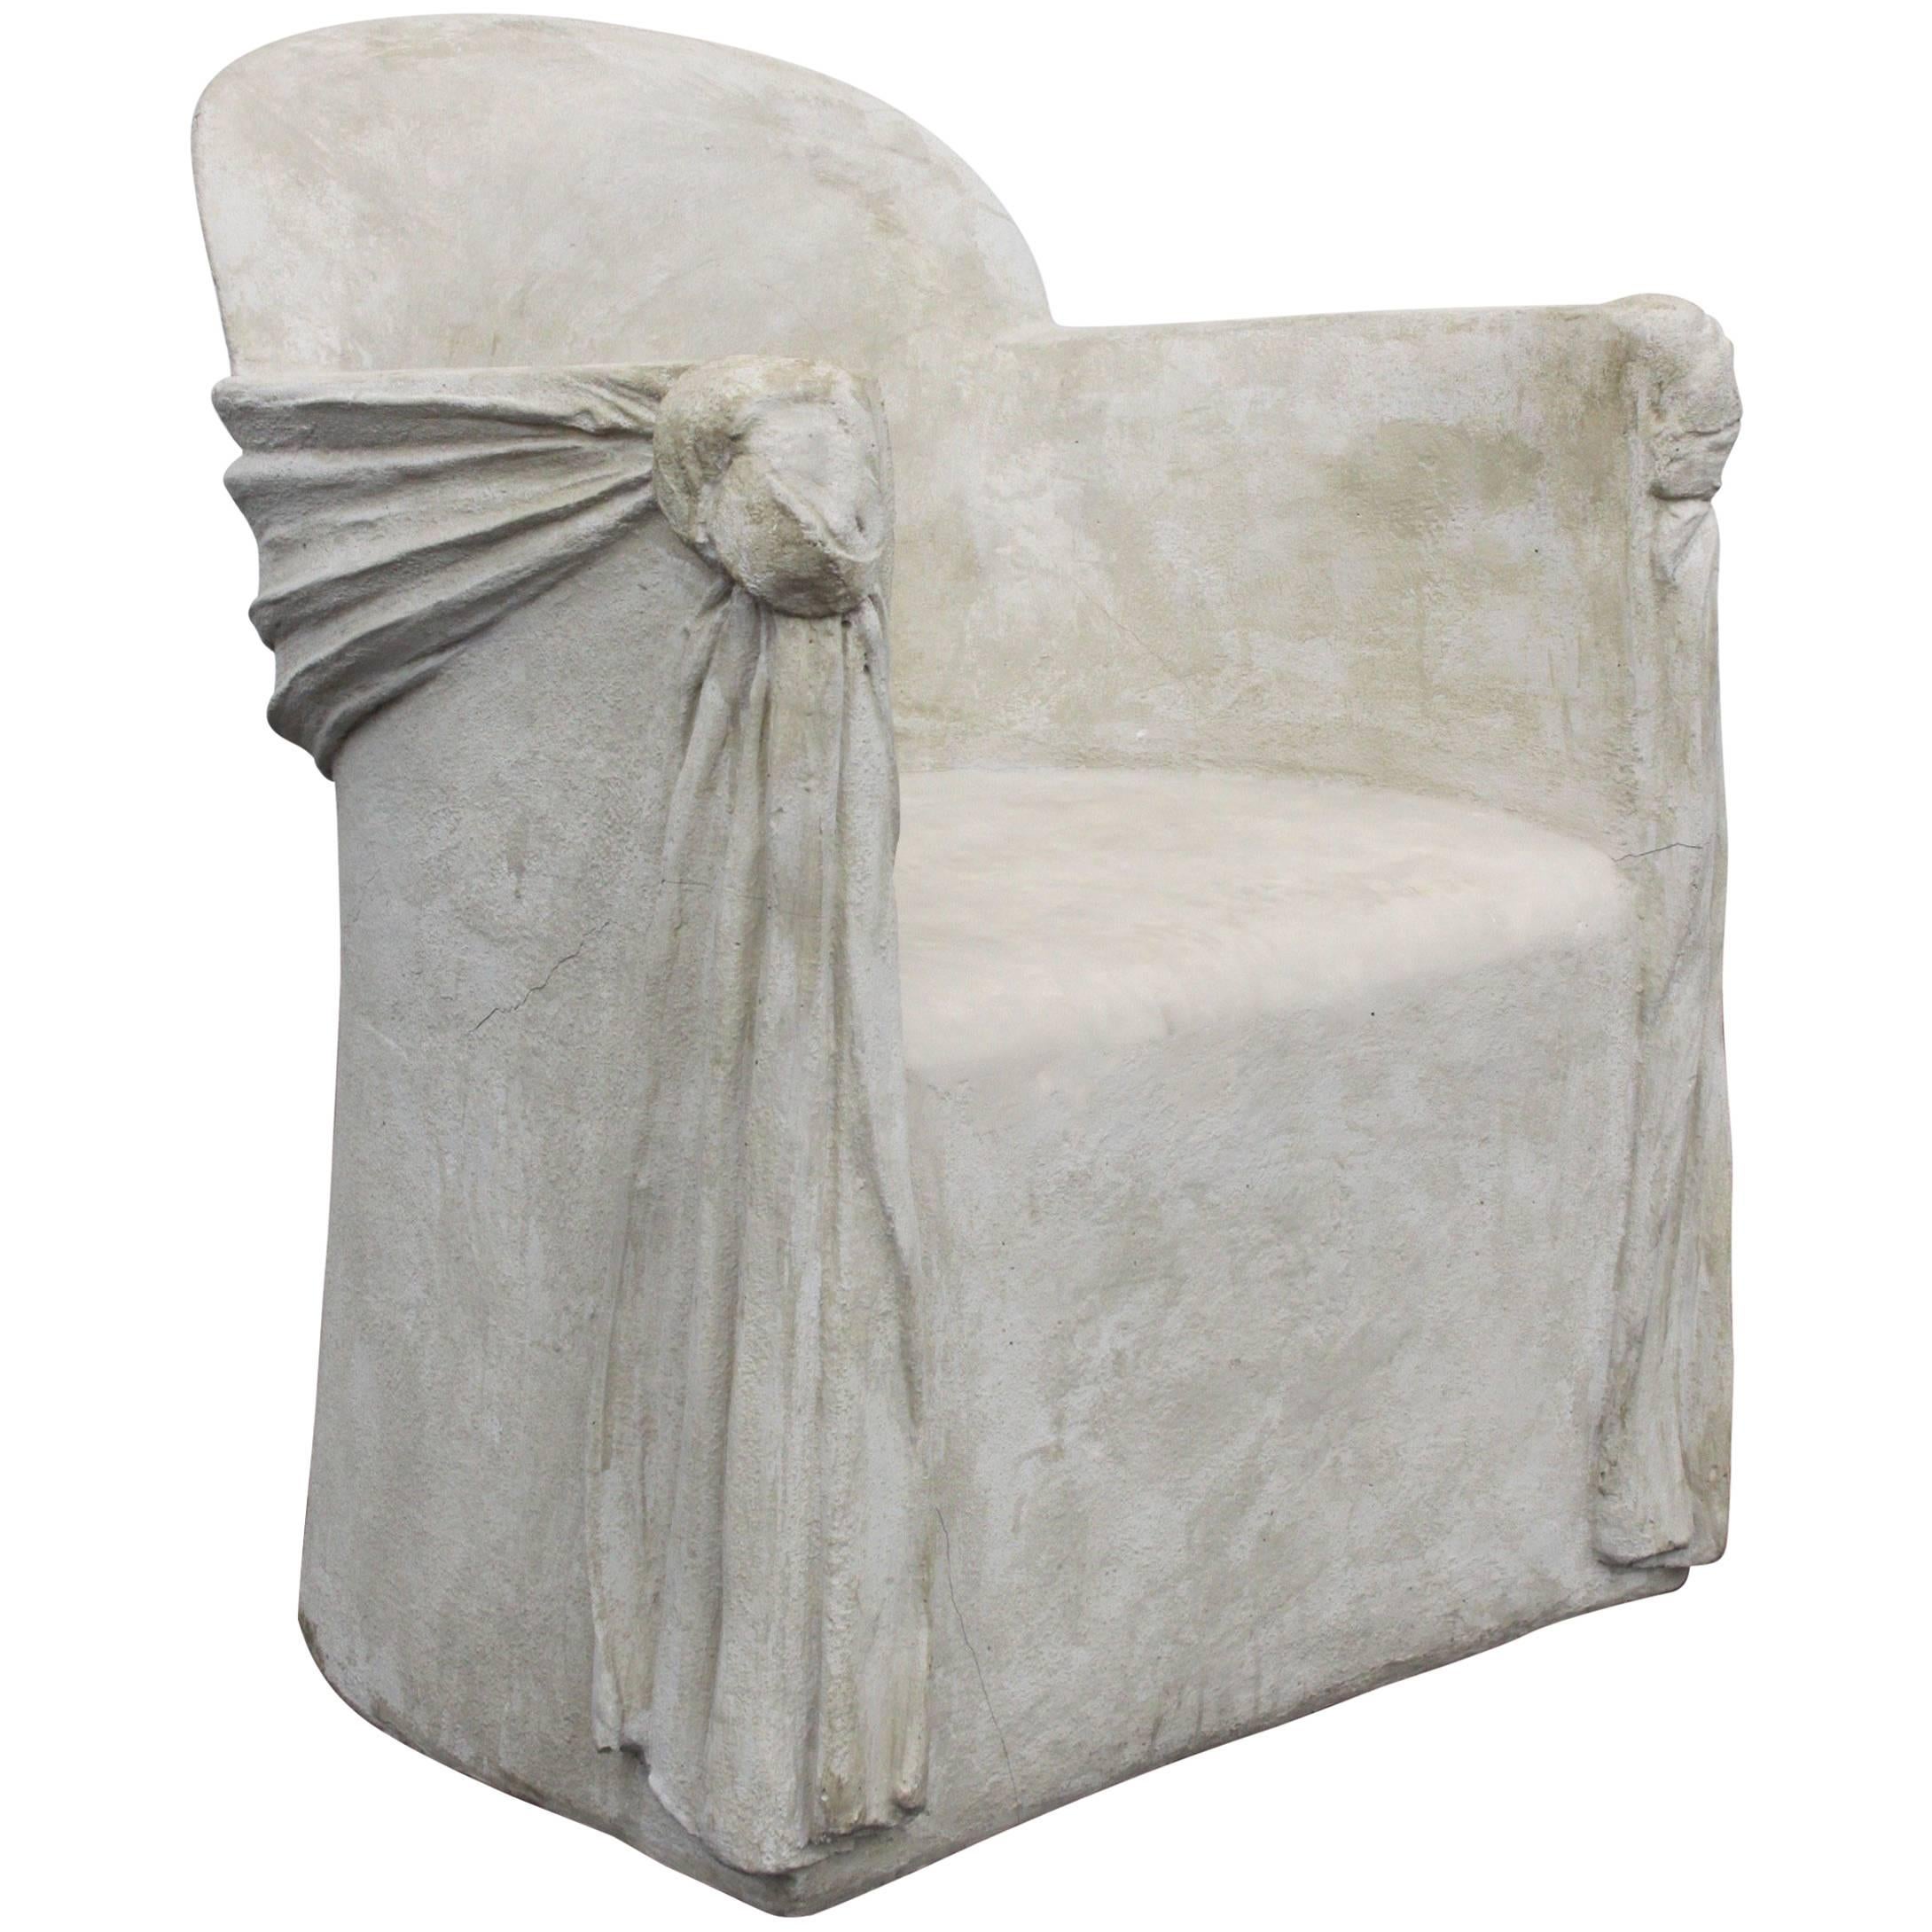 Plaster Armchair of Draped Form in the Style of John Dickinson